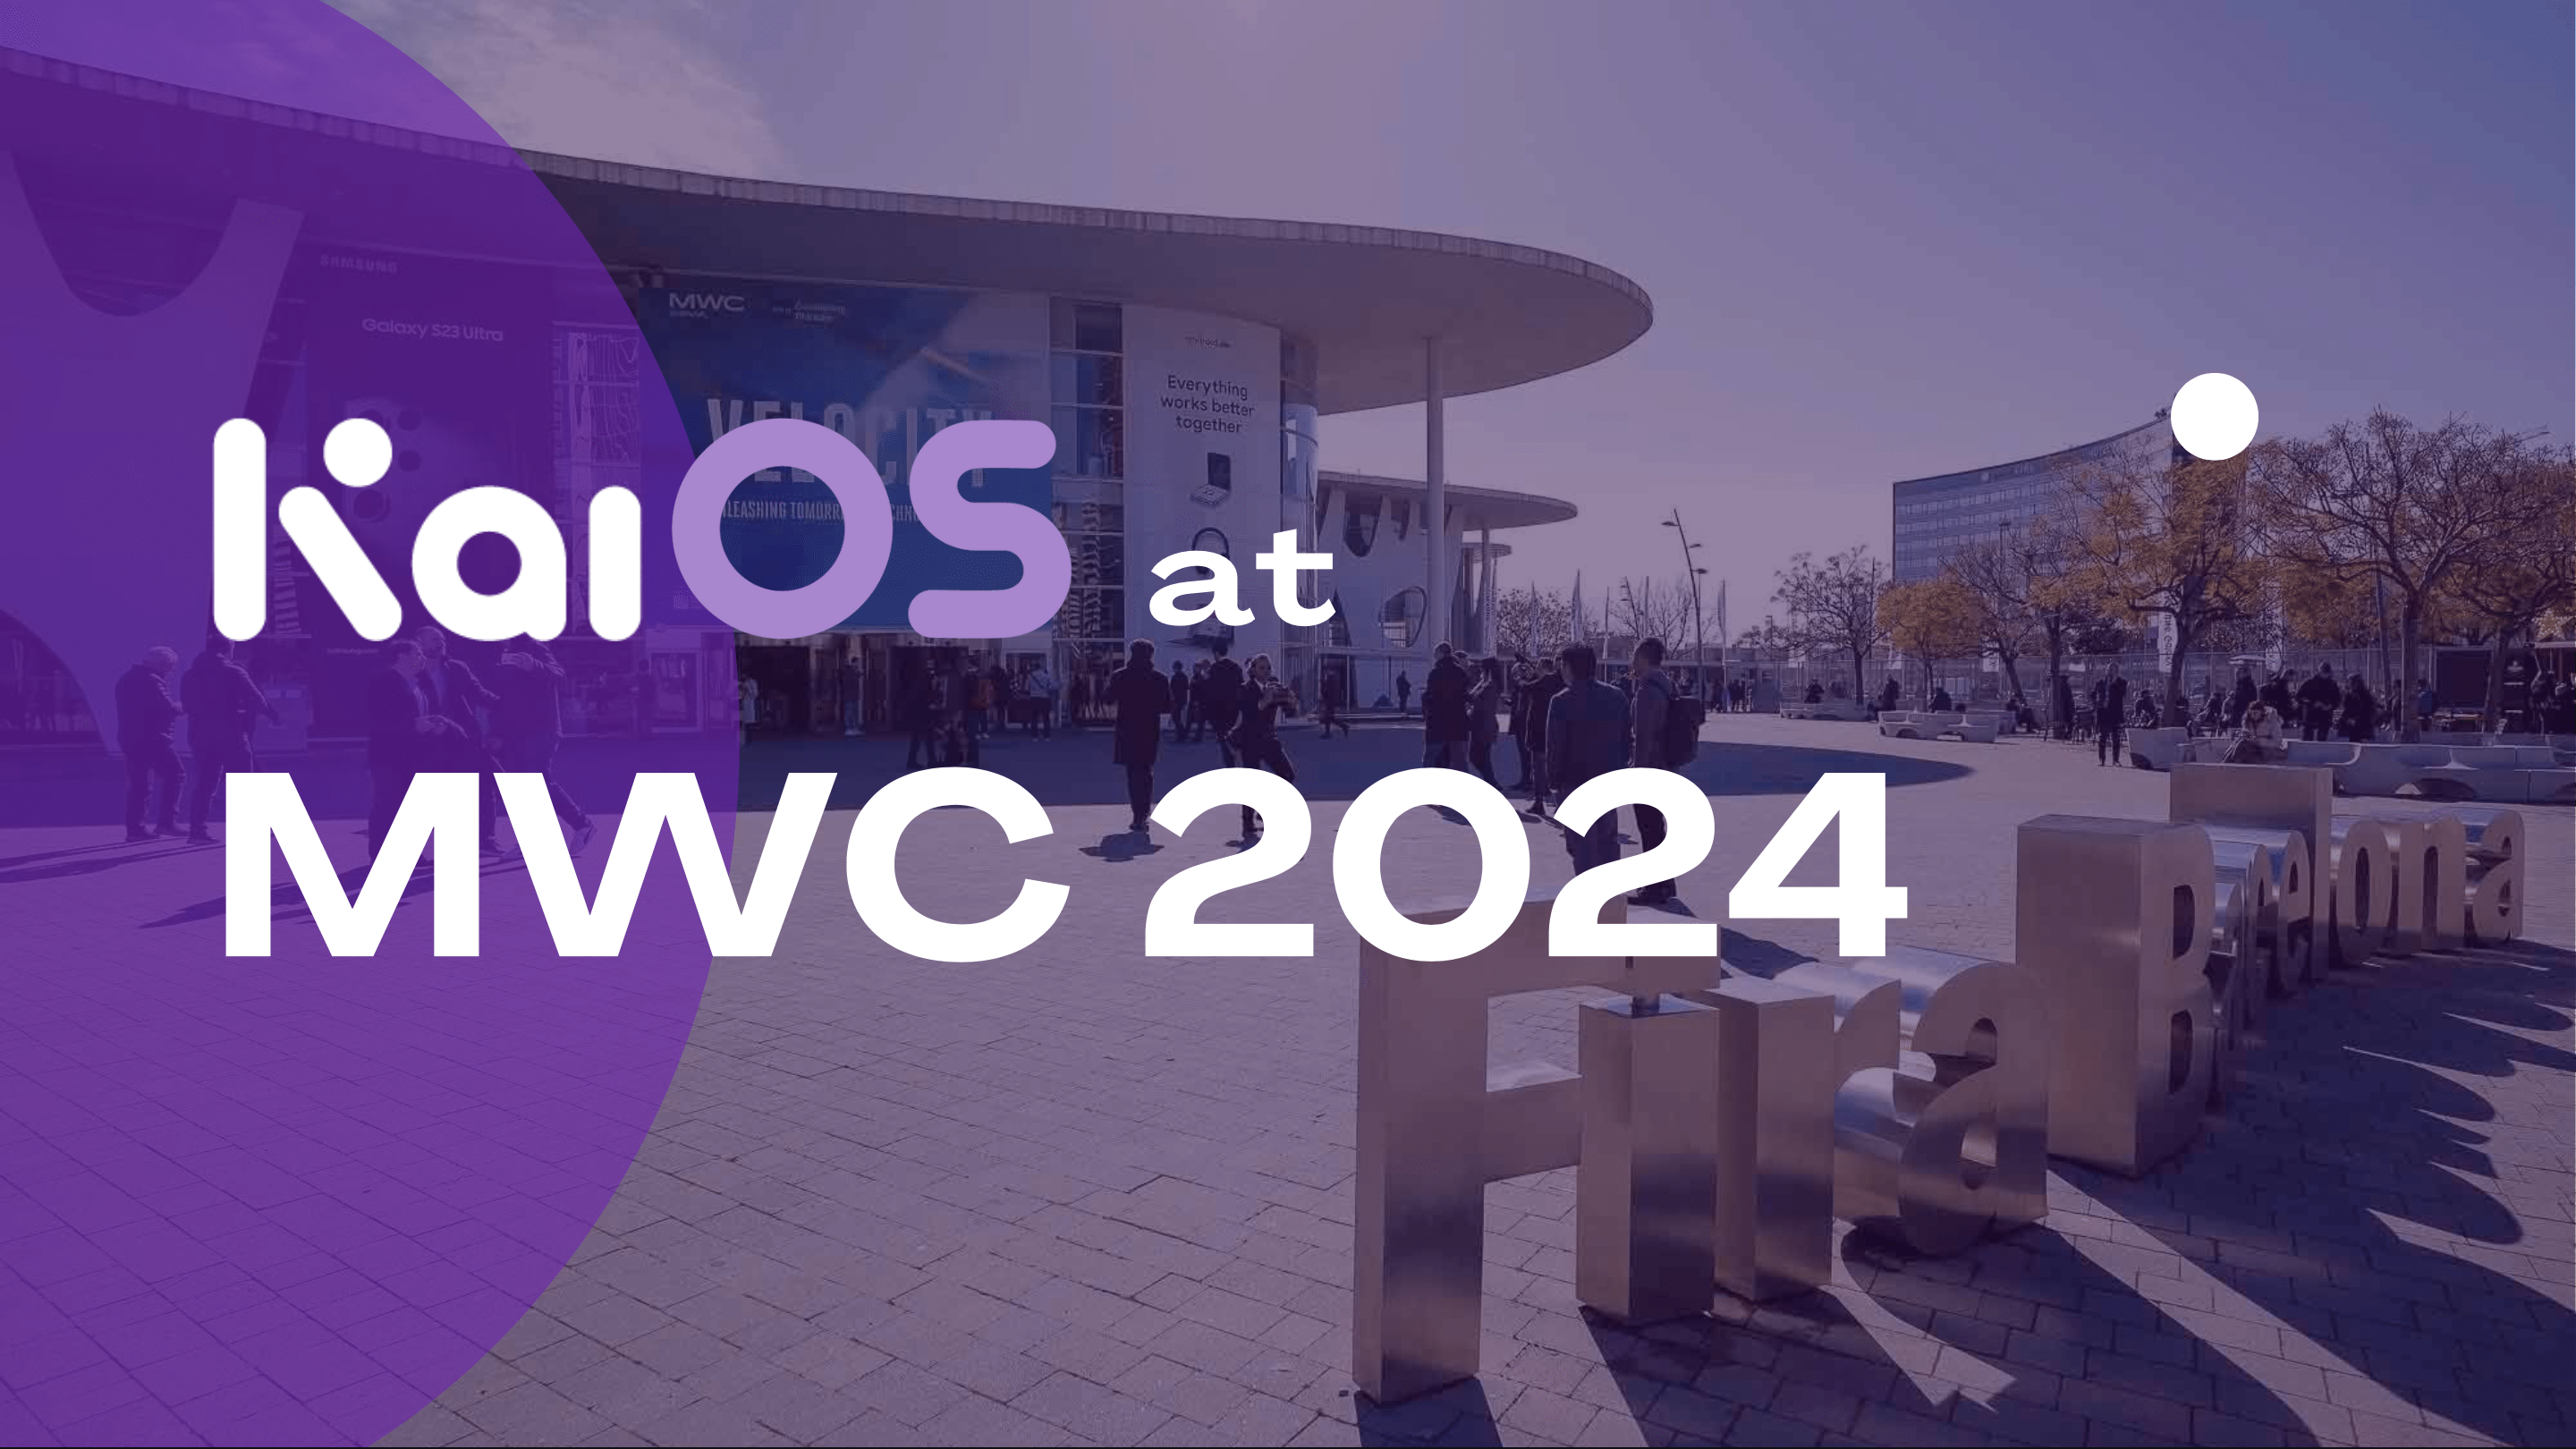 KaiOS was at MWC 2024